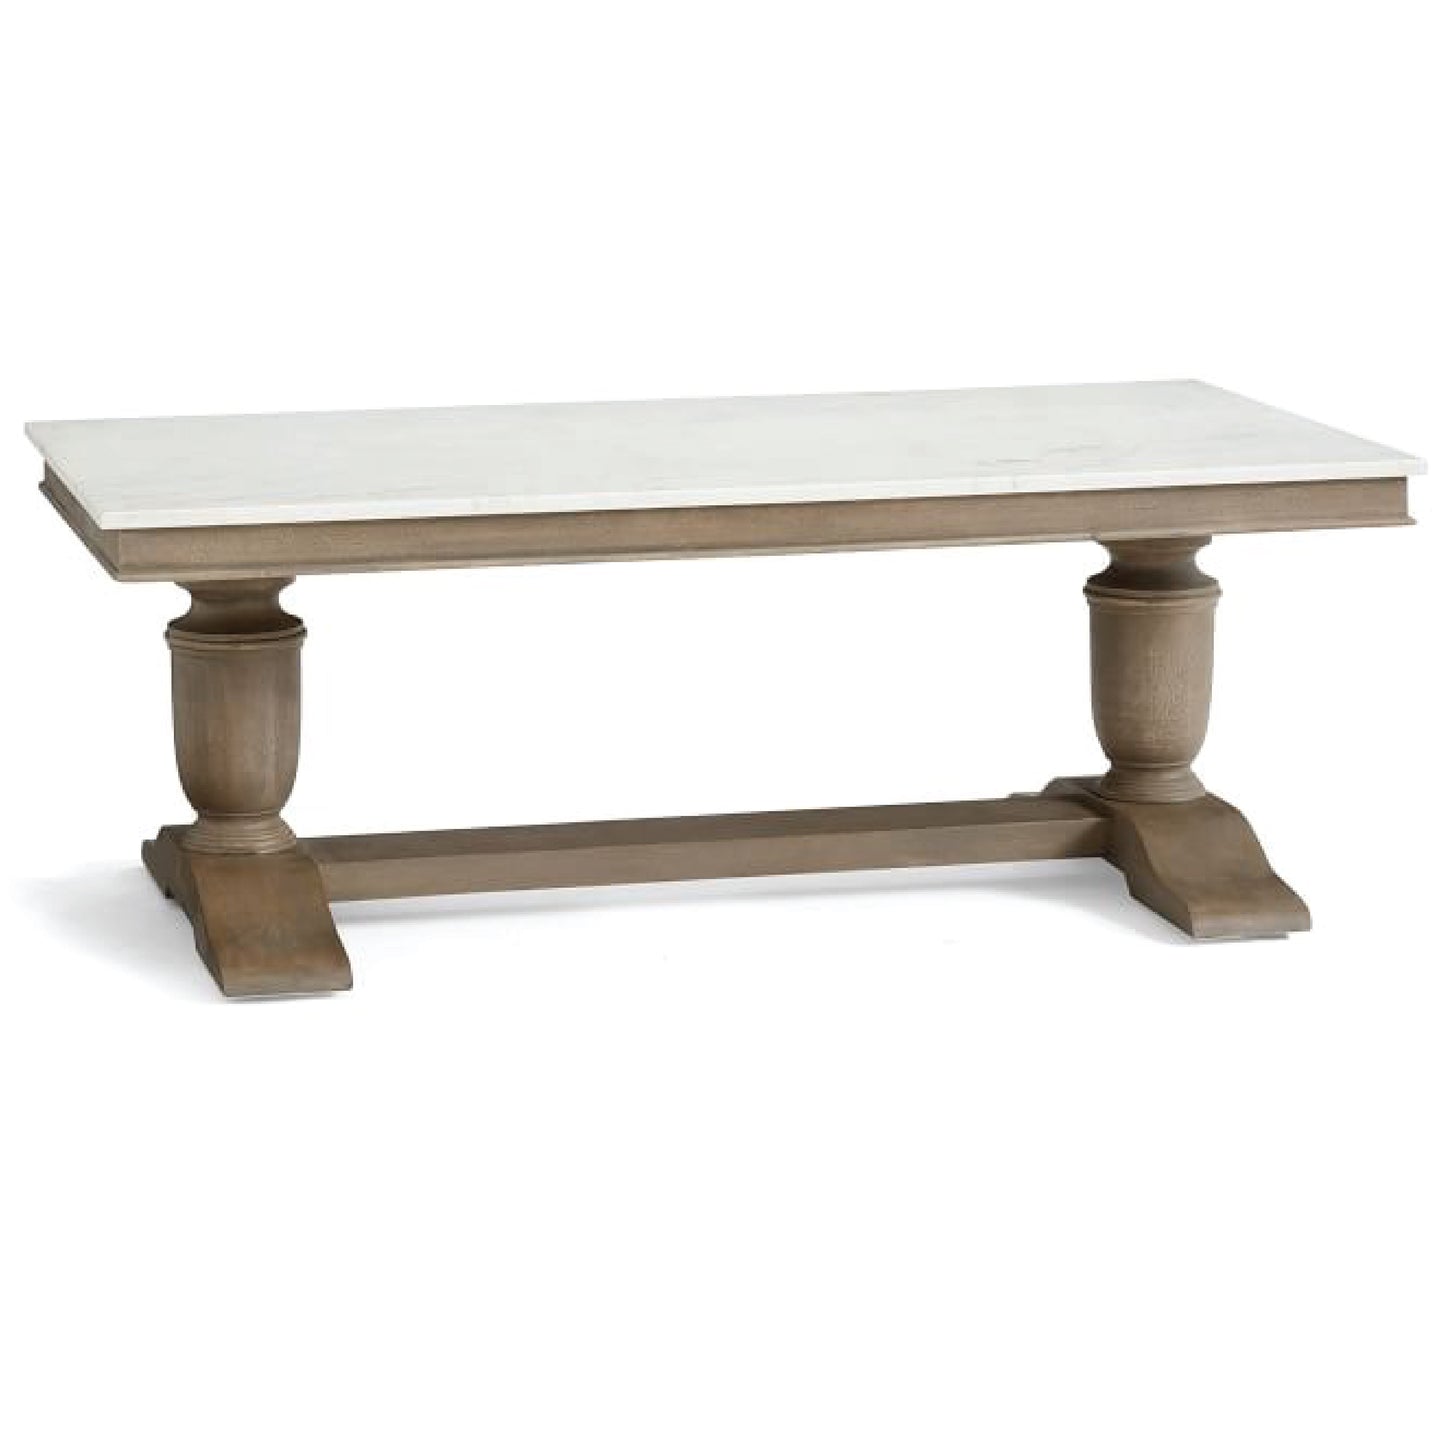 Wood Coffee Table with Cream Marble Top | DCH22